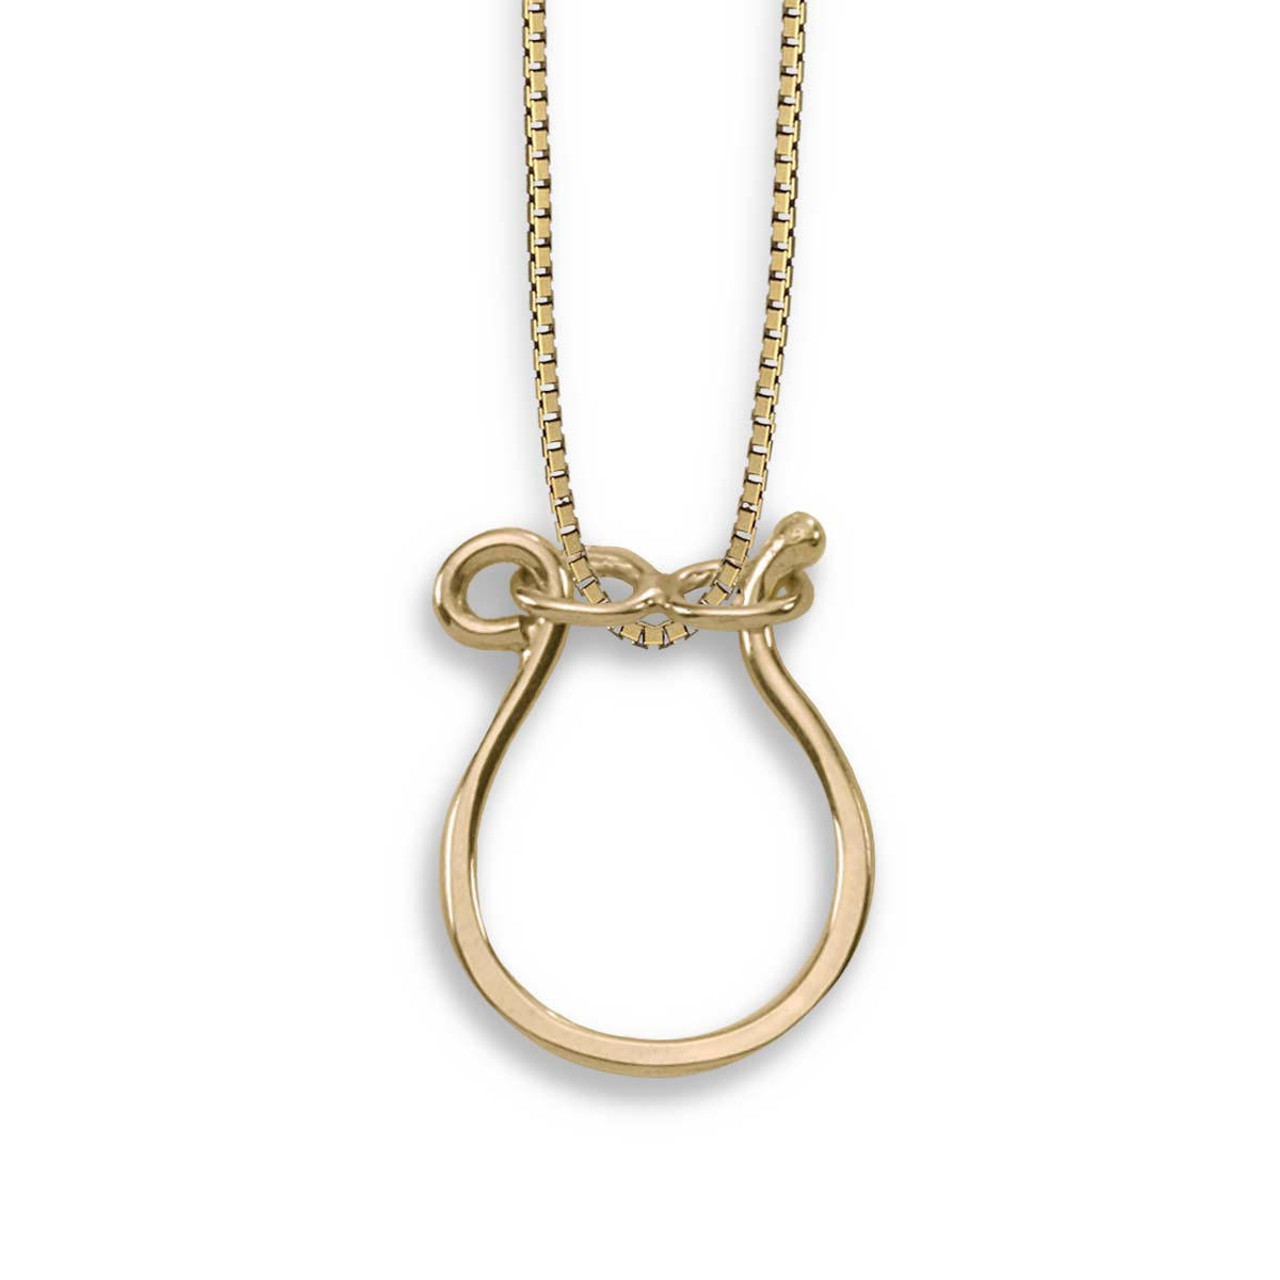 14K Gold Hand Forged Charm Holder Necklace | by JH Breakell